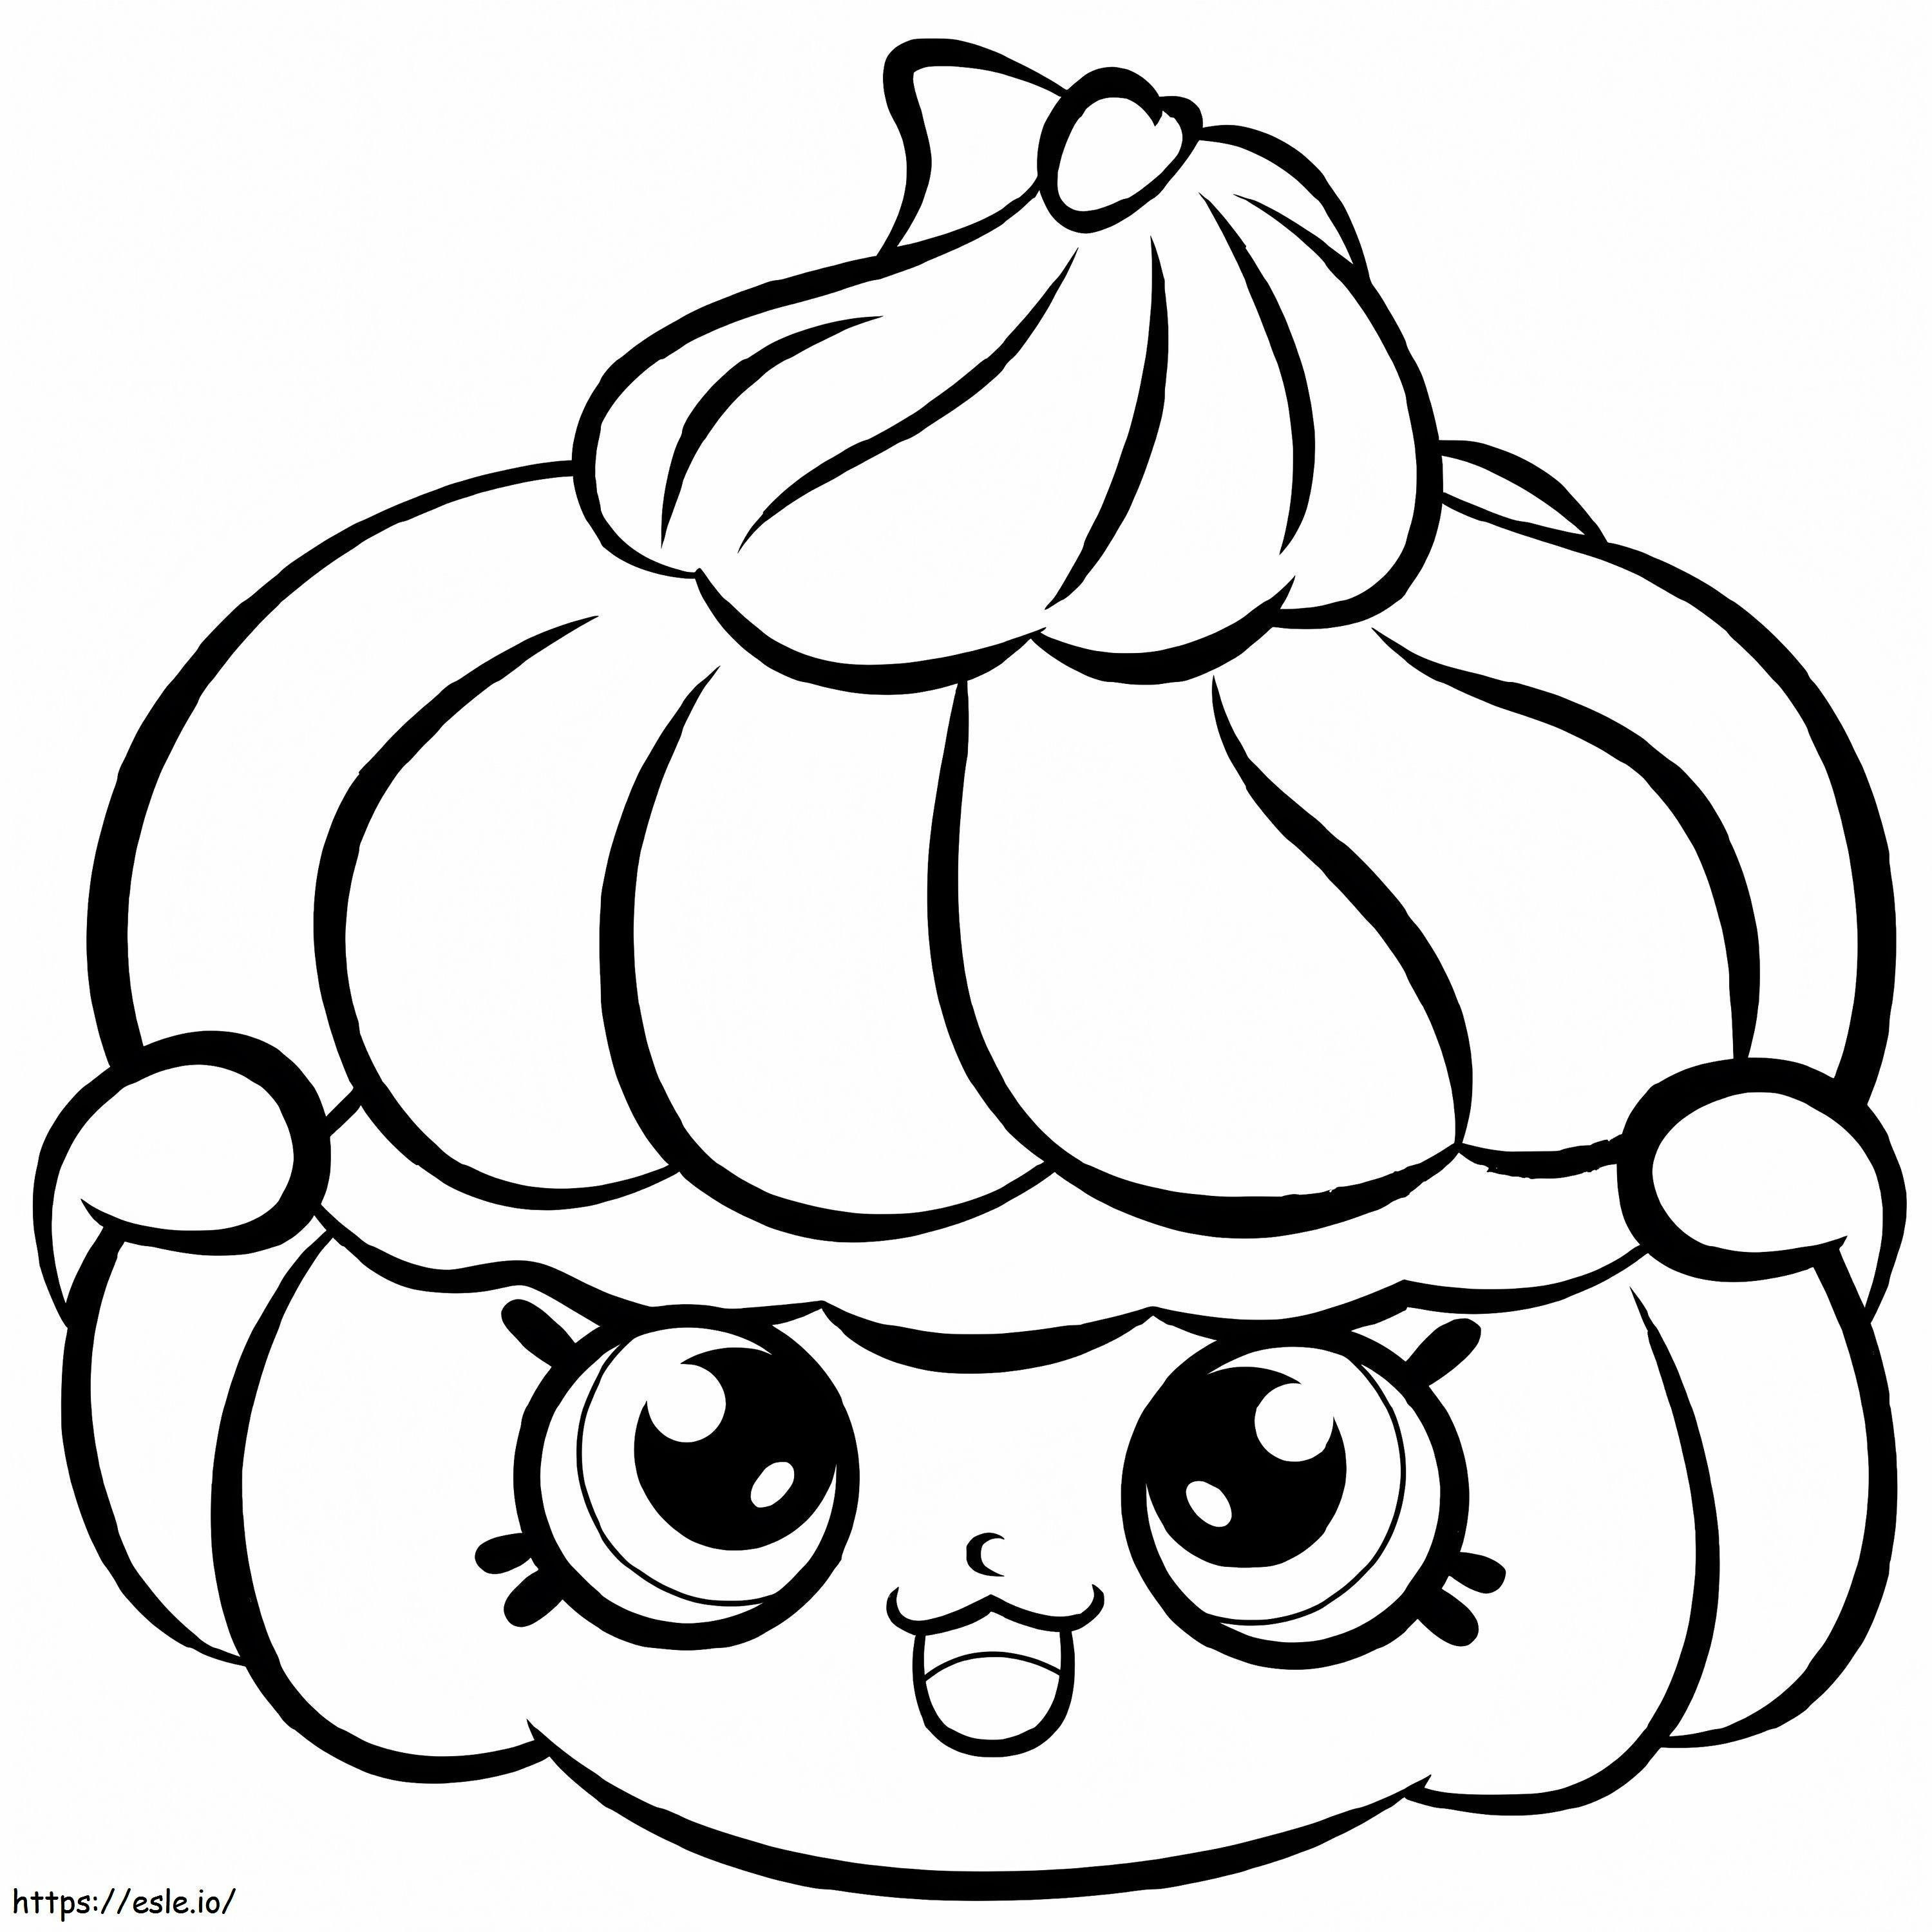 Bitzy Biscuit Shopkin coloring page